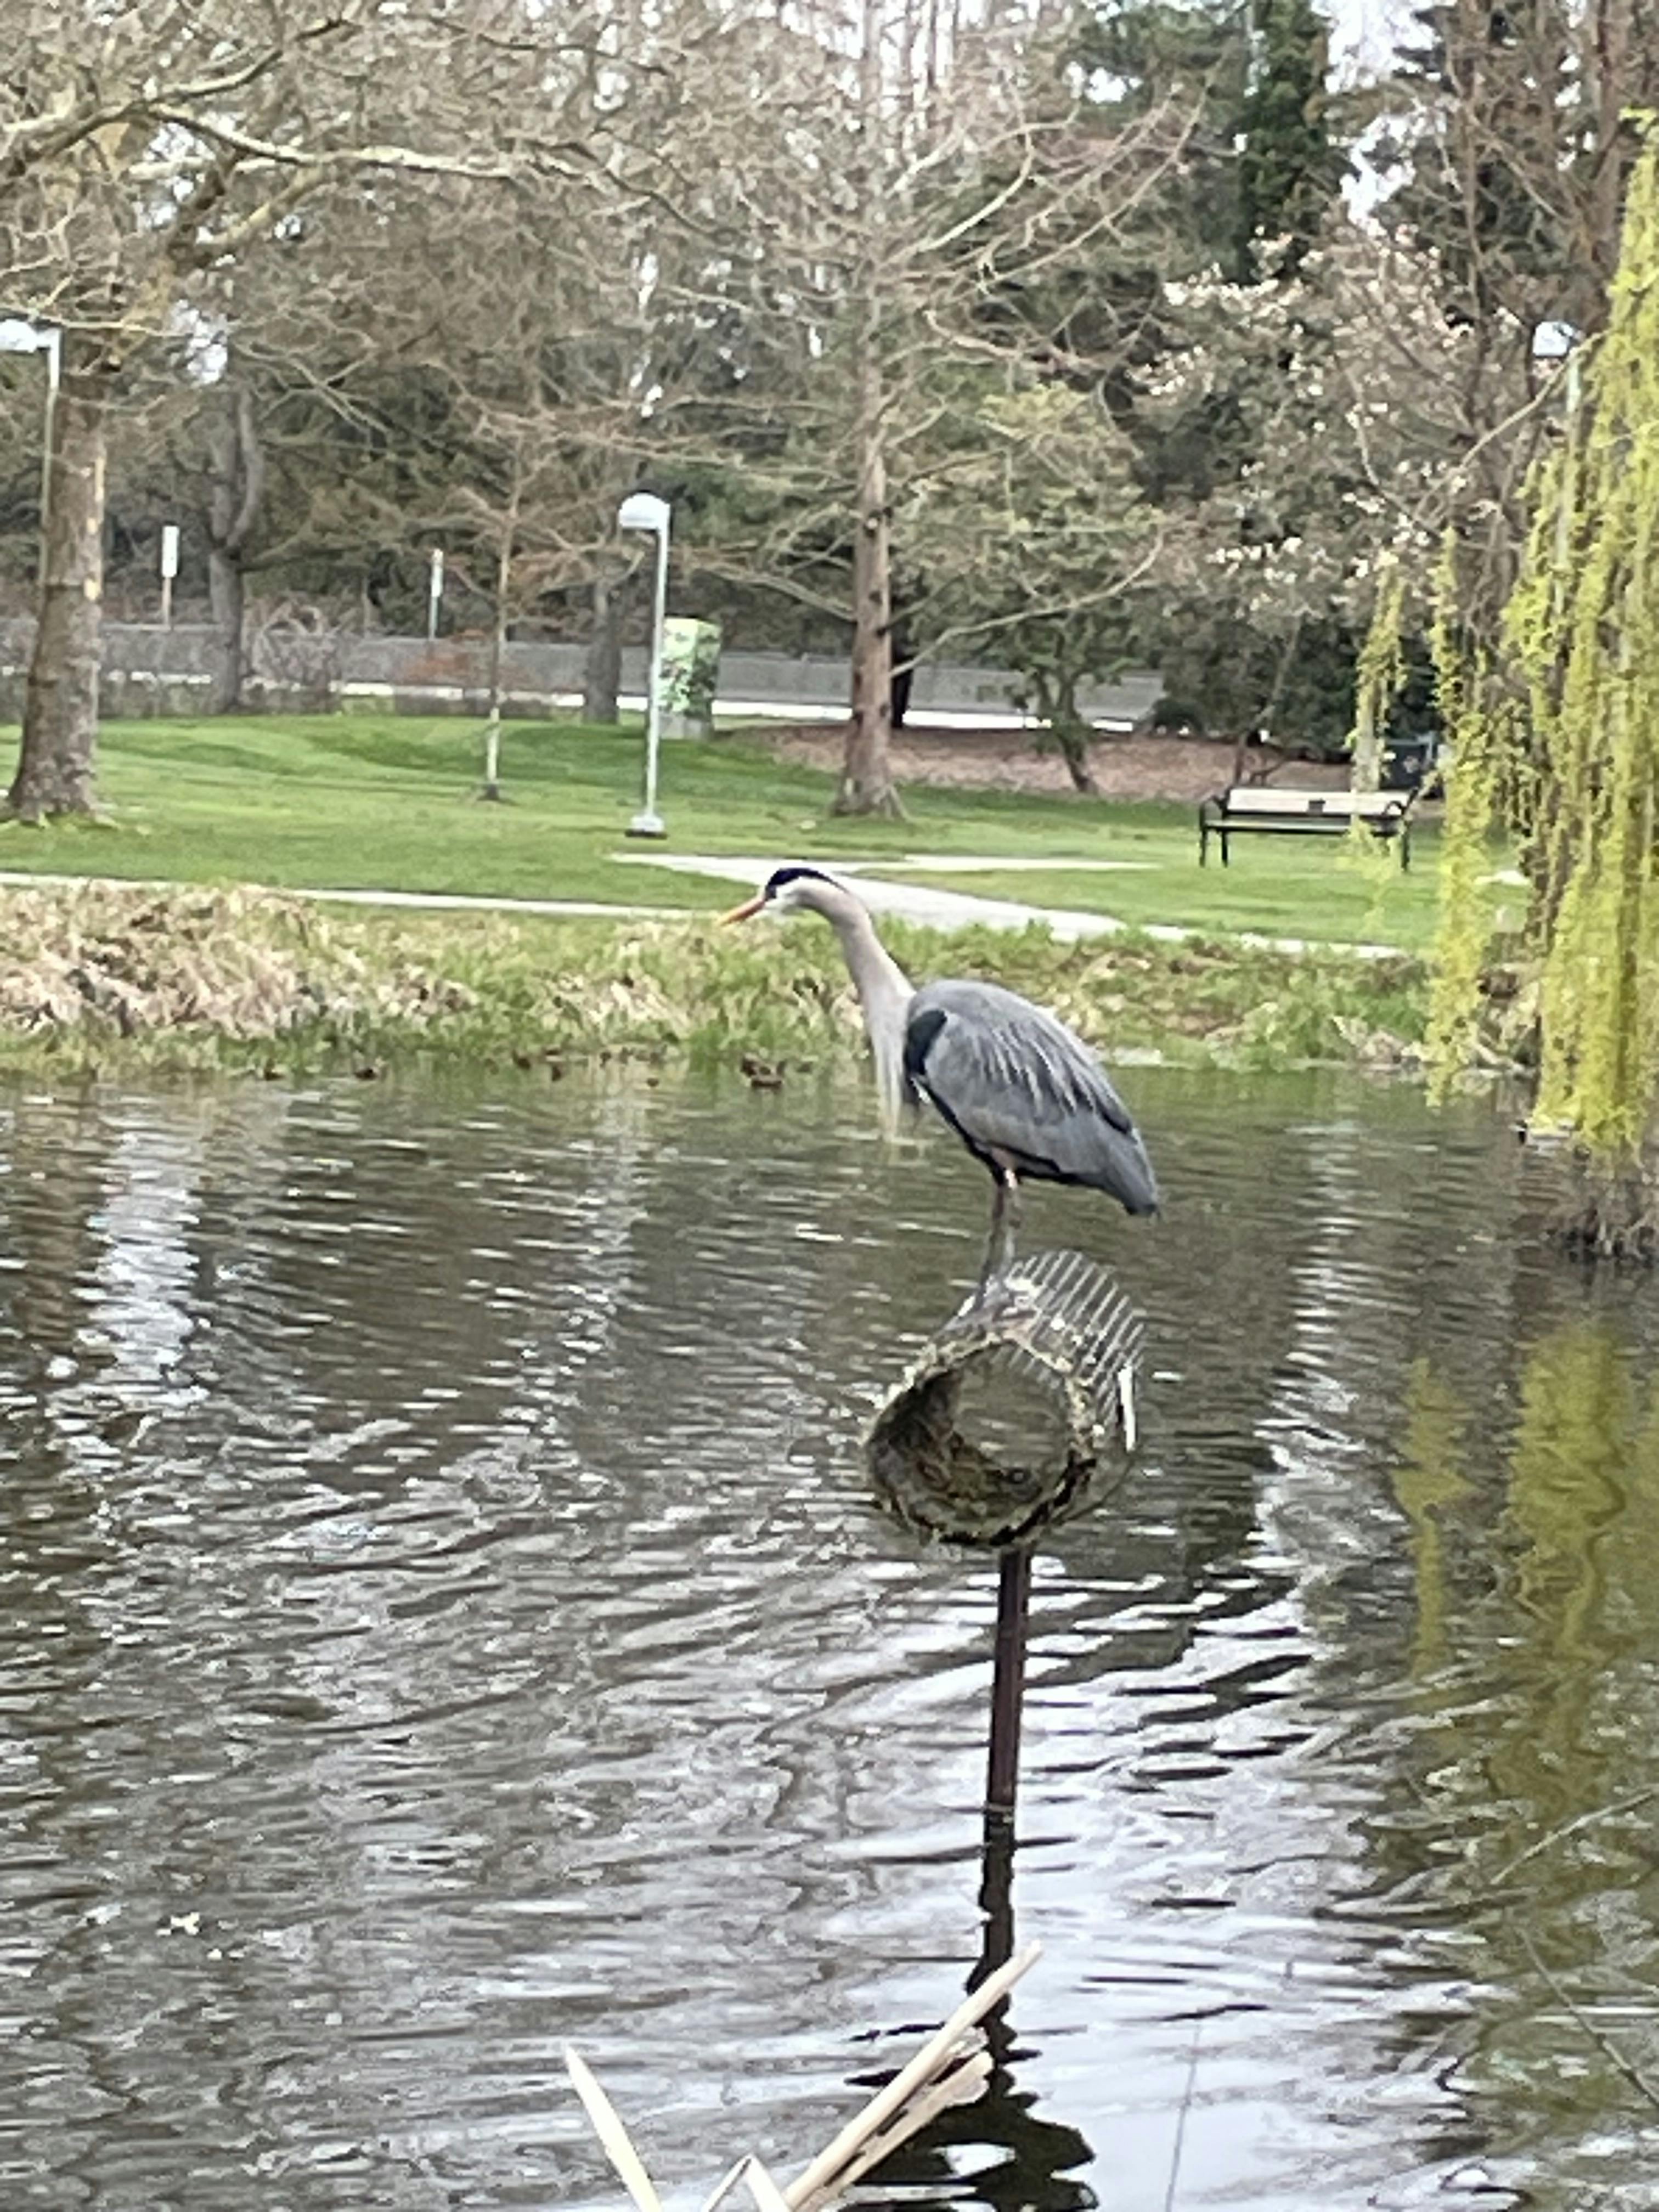 The Lonely Heron